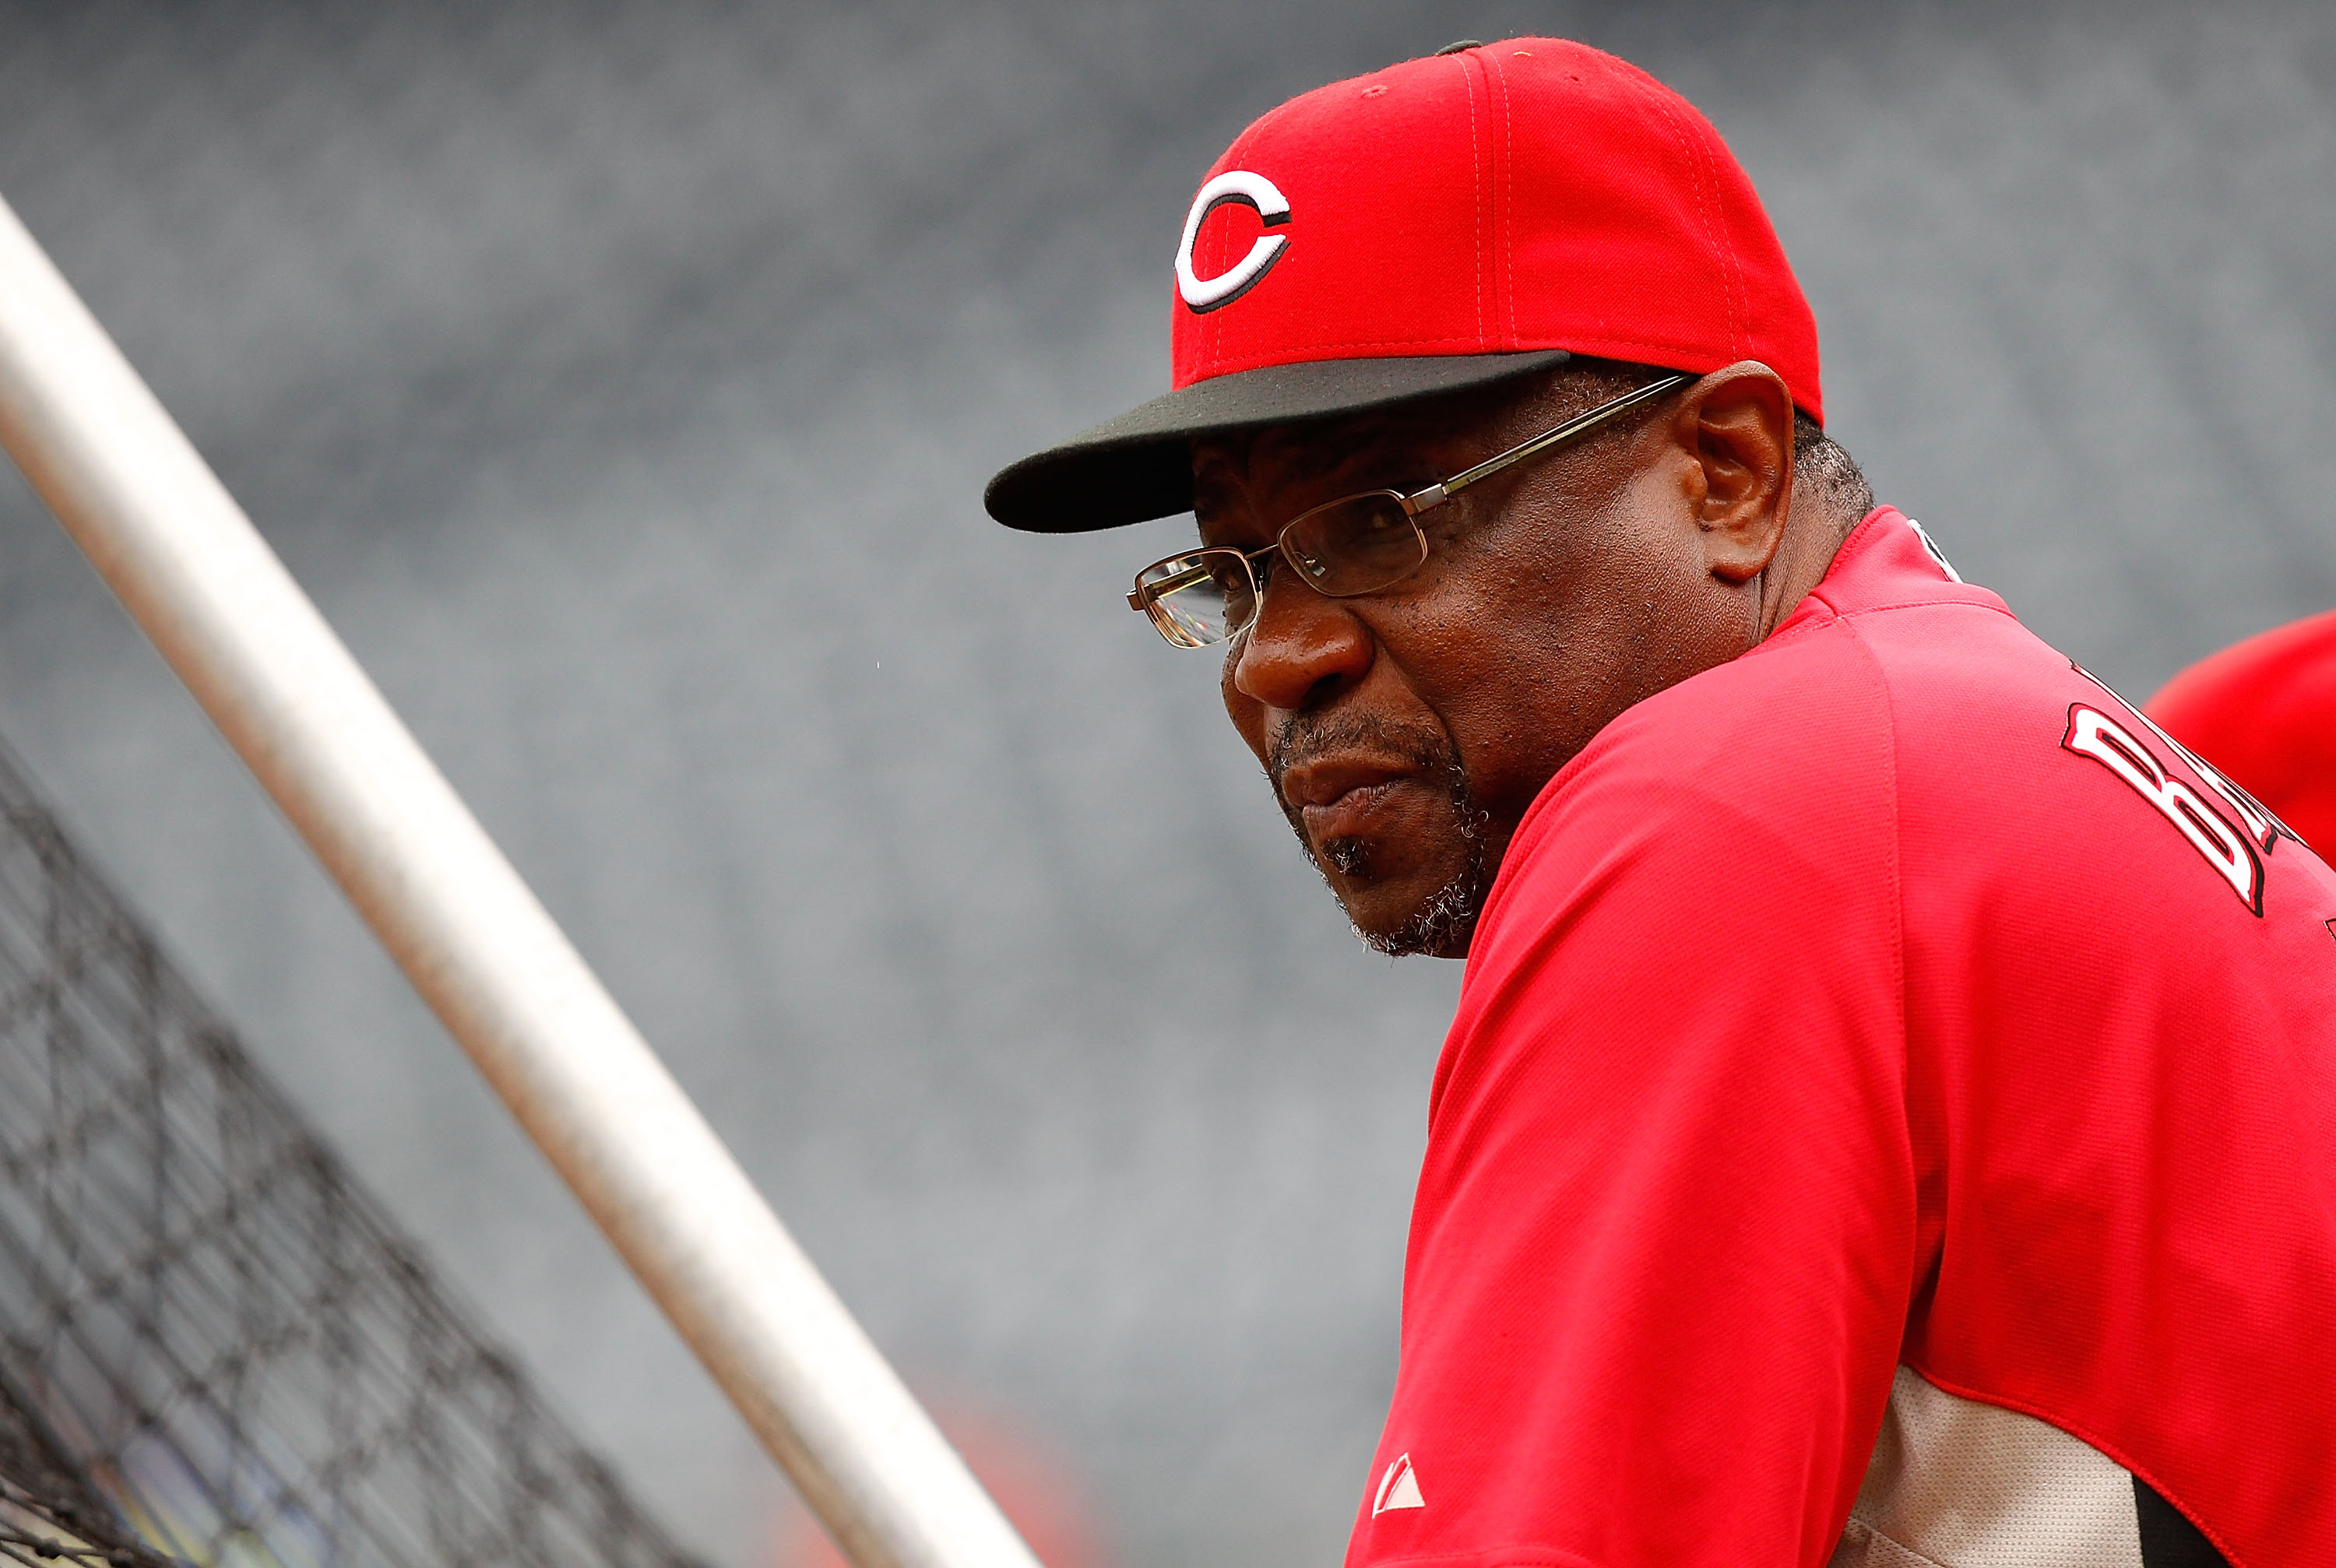 PITTSBURGH - AUGUST 03:  Manager Dusty Baker #12 of the Cincinnati Reds watches batting practice prior to the game against the Pittsburgh Pirates on August 3, 2010 at PNC Park in Pittsburgh, Pennsylvania.  (Photo by Jared Wickerham/Getty Images)